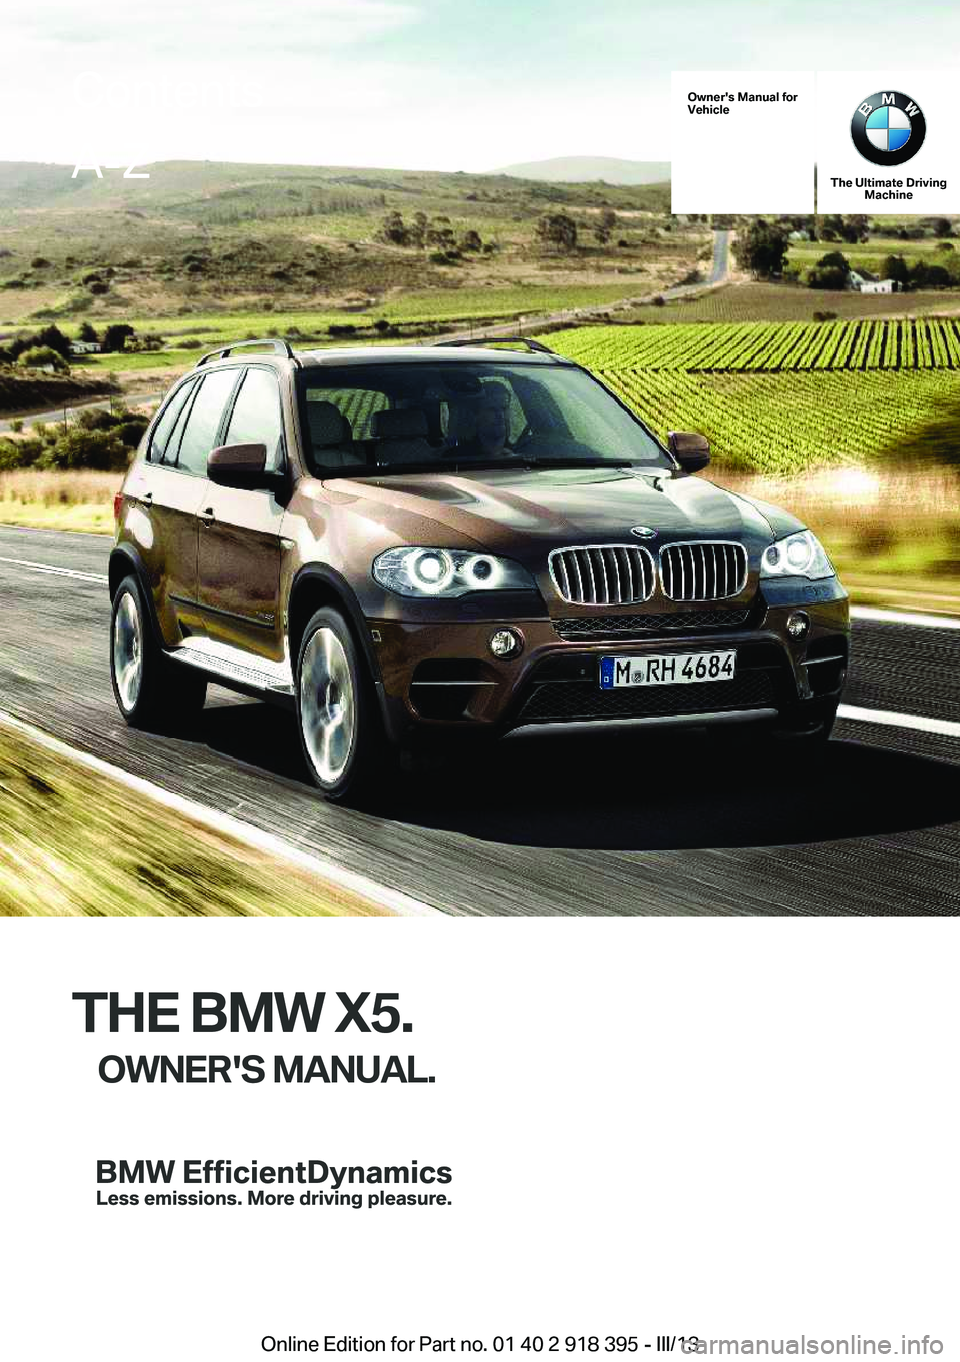 BMW X5 XDRIVE 35I 2013  Owners Manual Owner's Manual for
Vehicle
The Ultimate Driving Machine
THE BMW X5.
OWNER'S MANUAL.
ContentsA-Z
Online Edition for Part no. 01 40 2 918 395 - III/13   